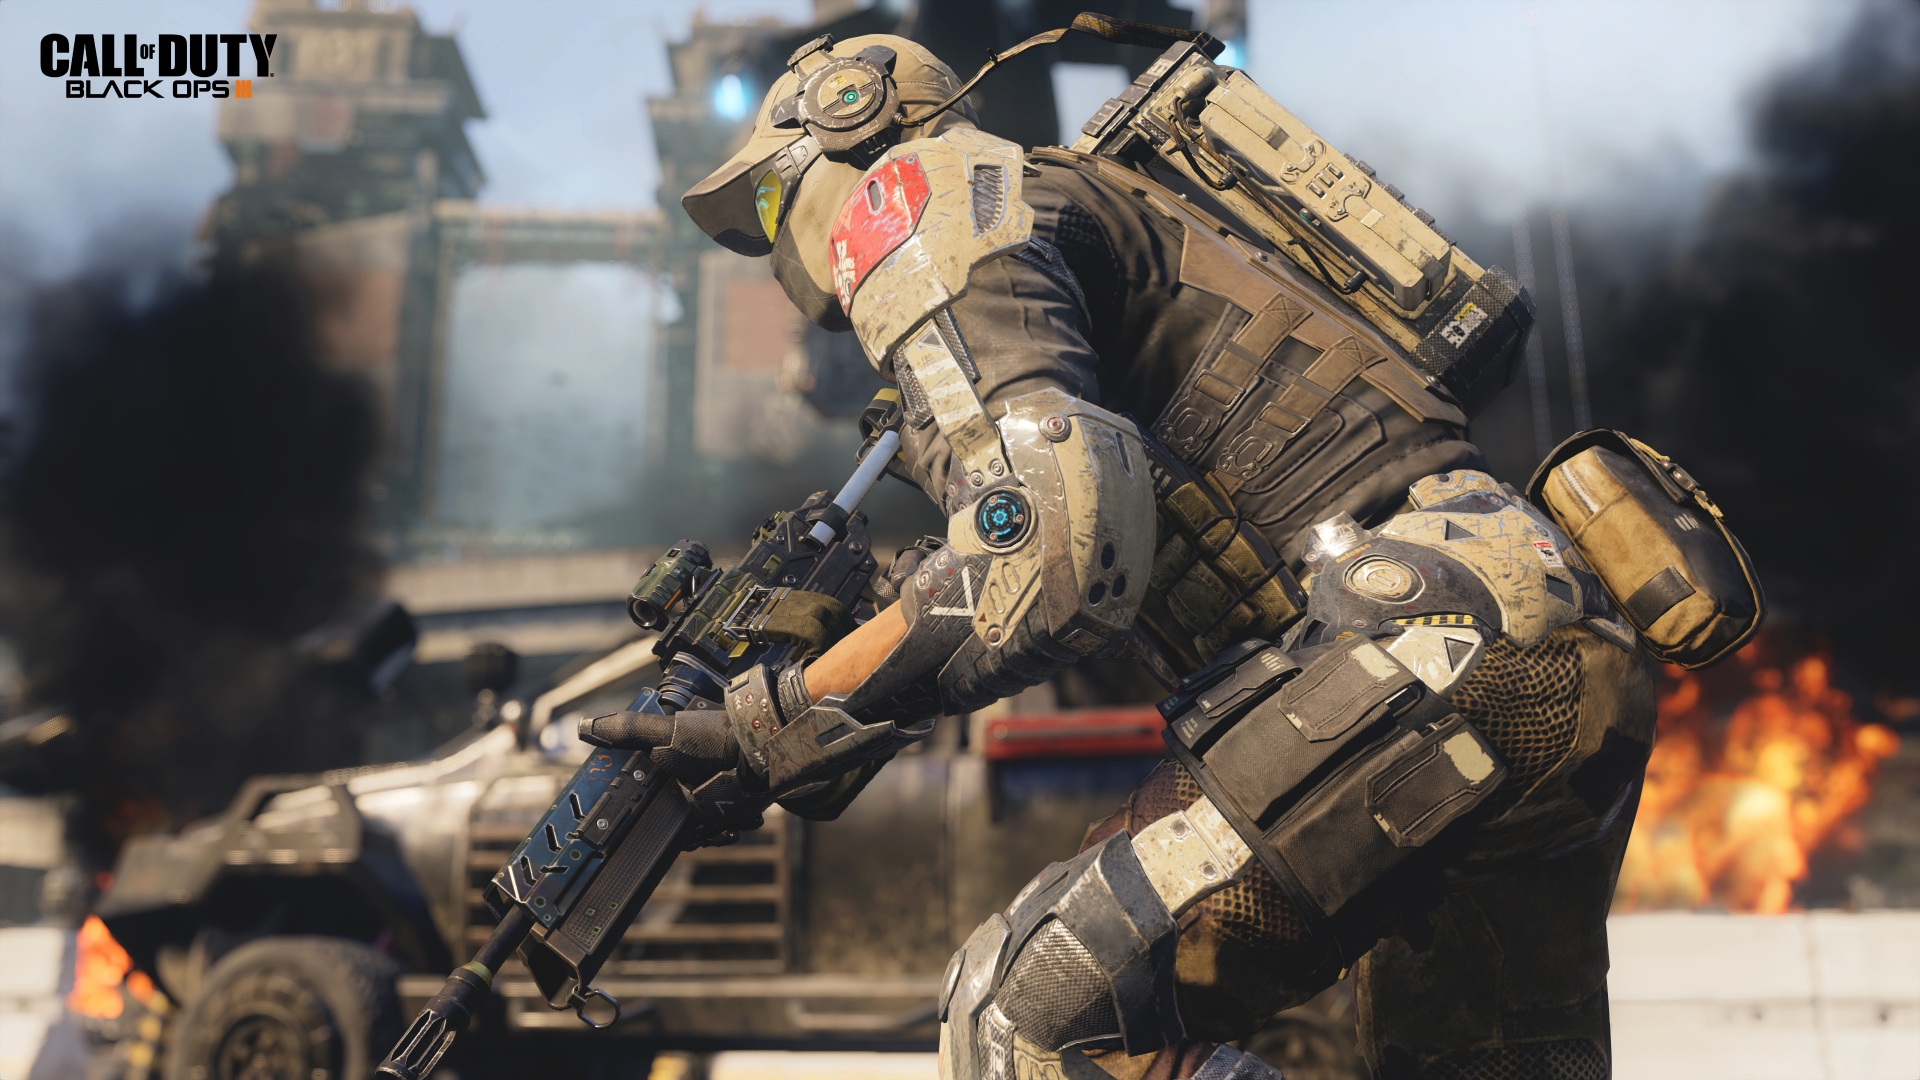 Call of Duty Black Ops III for 1920 x 1080 HDTV 1080p resolution